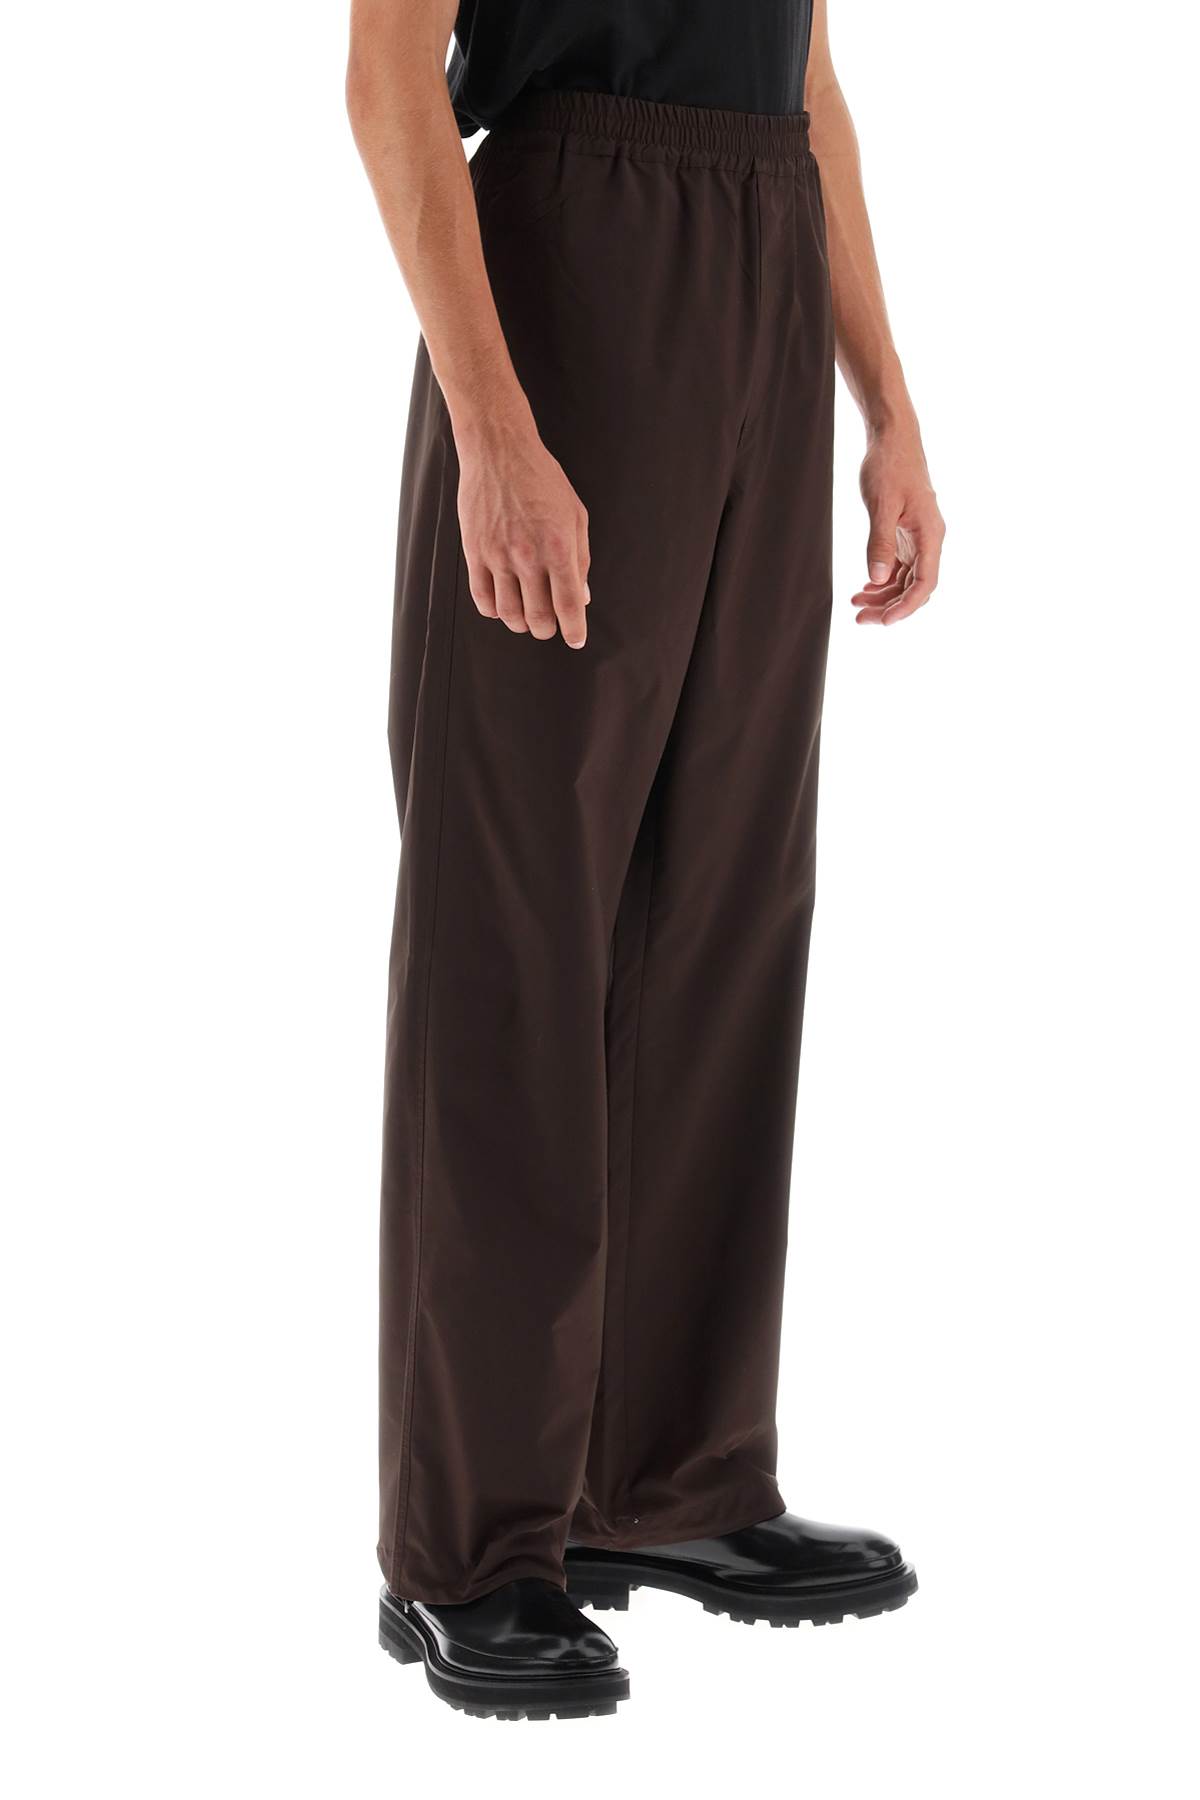 Shop Oamc Dome Straight Cut Pants In Walnut (brown)